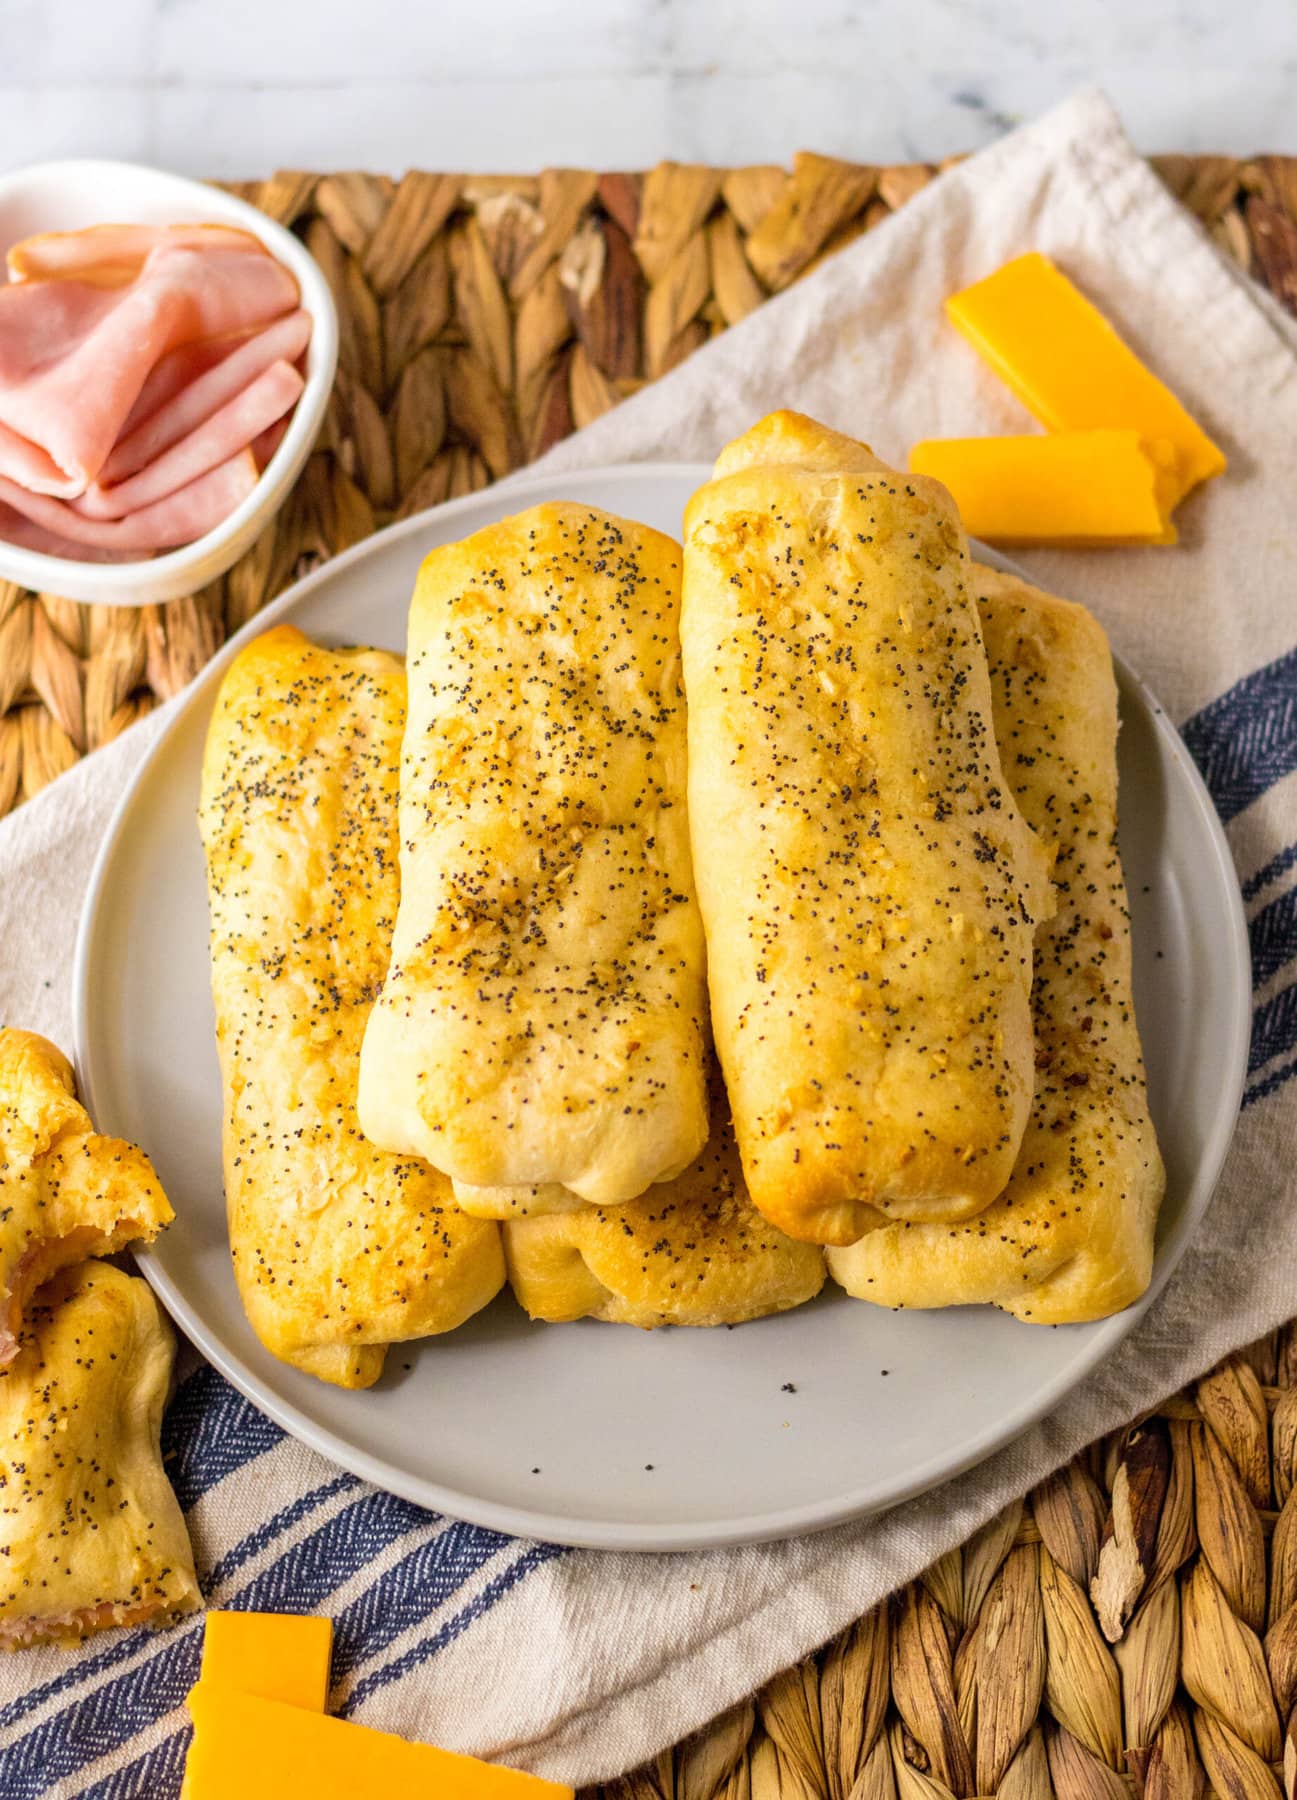 Ham and Cheese Sticks in a pile on the plate.